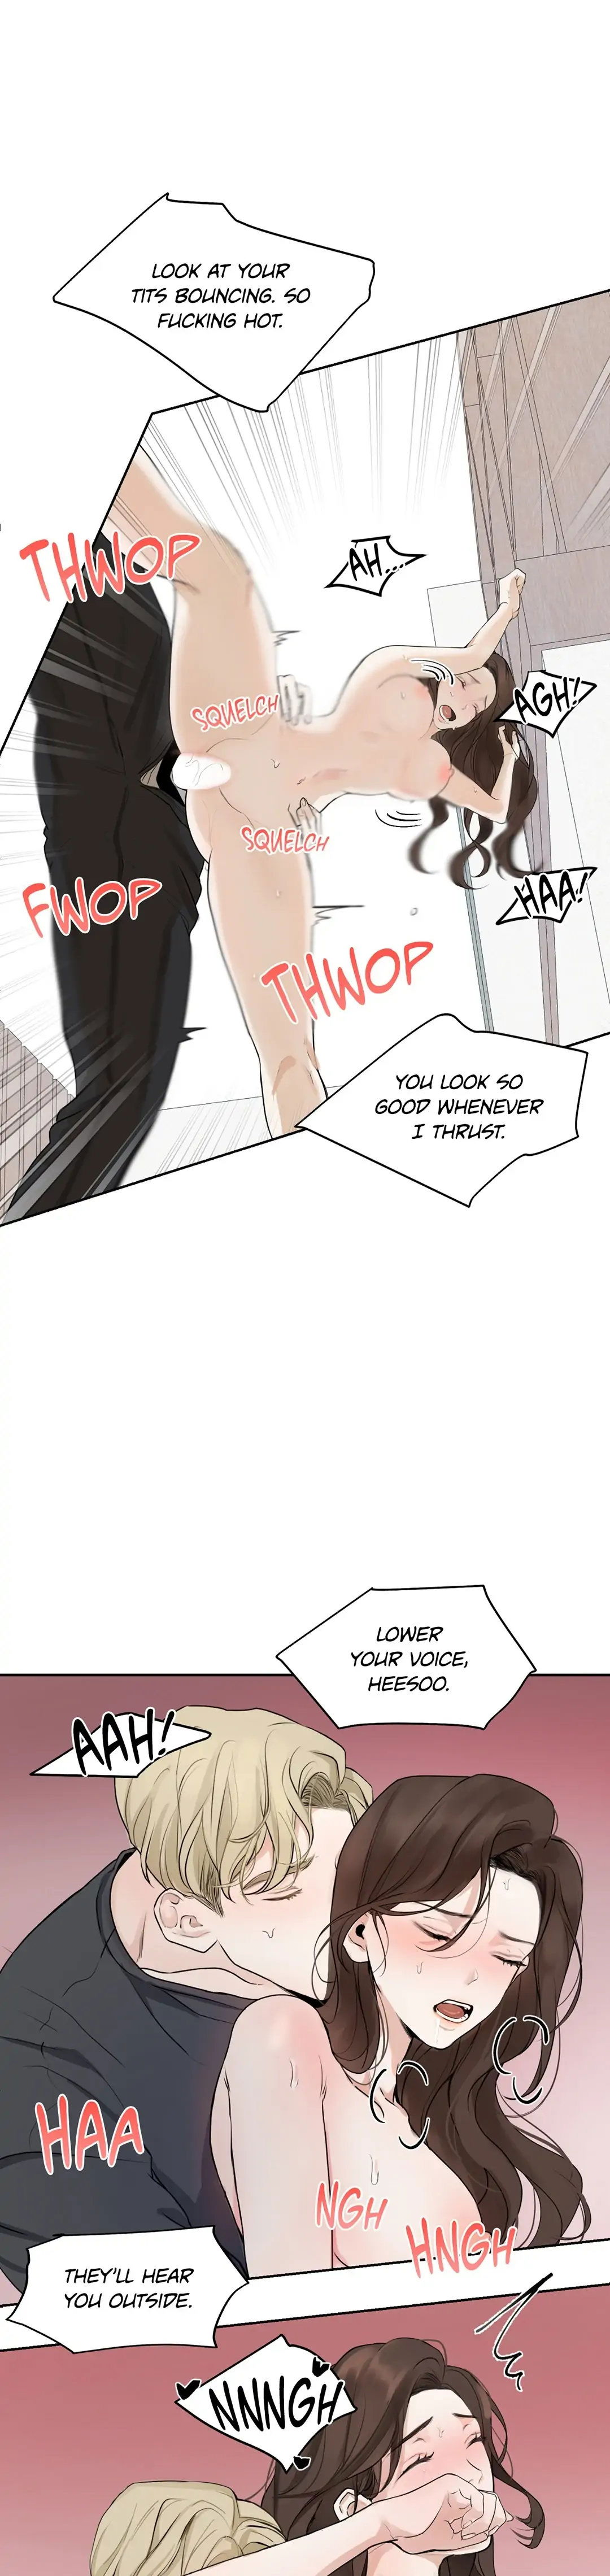 the-men-in-my-bed-chap-3-3